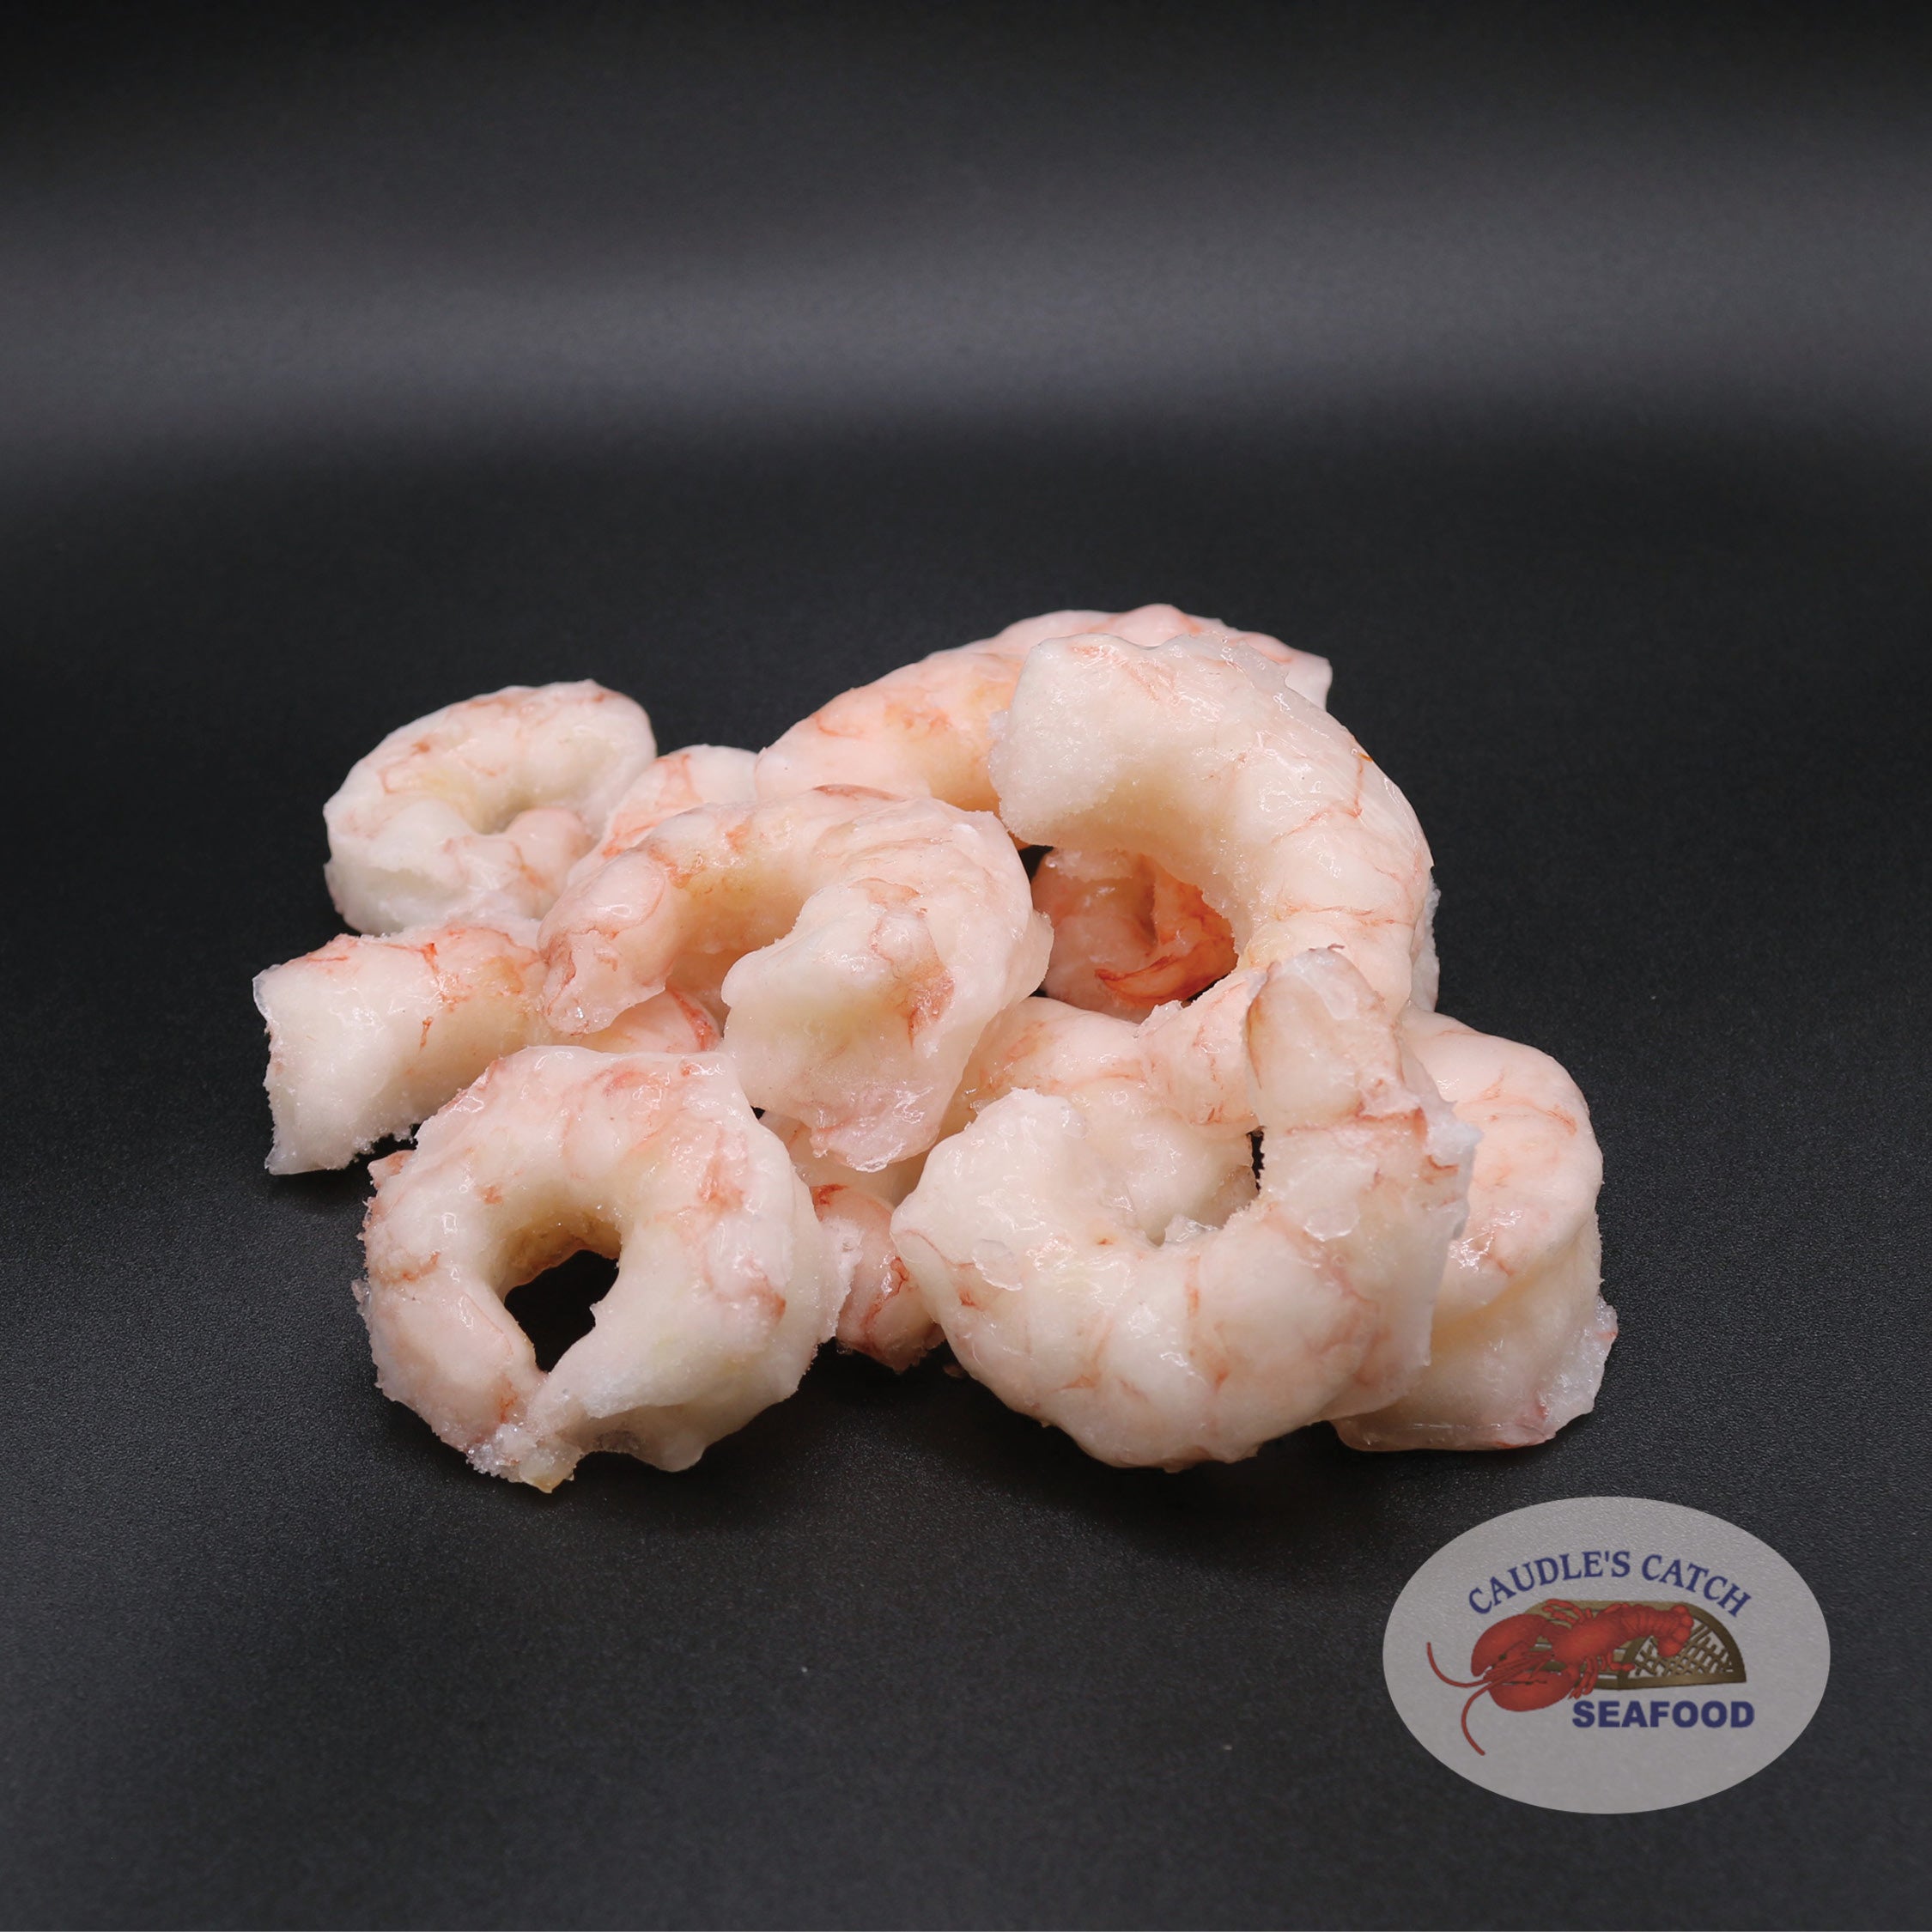 lindring I faglært Wild-Caught Raw Argentine Red Shrimp (Shell-Off, 16-20ct) | Caudle's Catch  Seafood